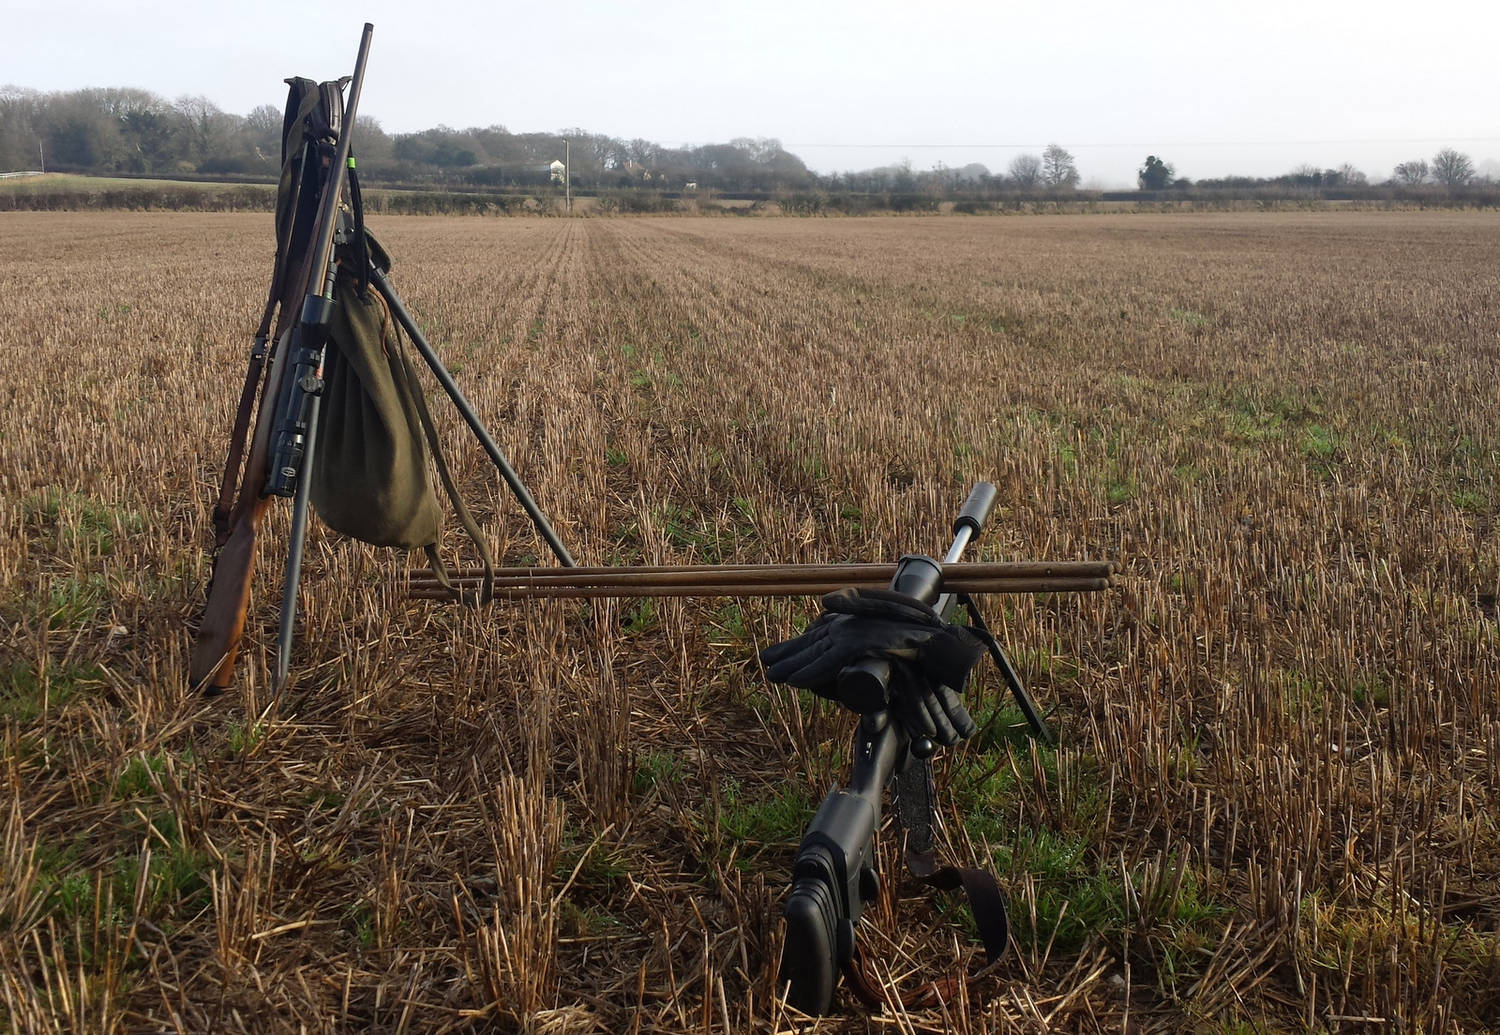 A photograph of shooting sticks in a field